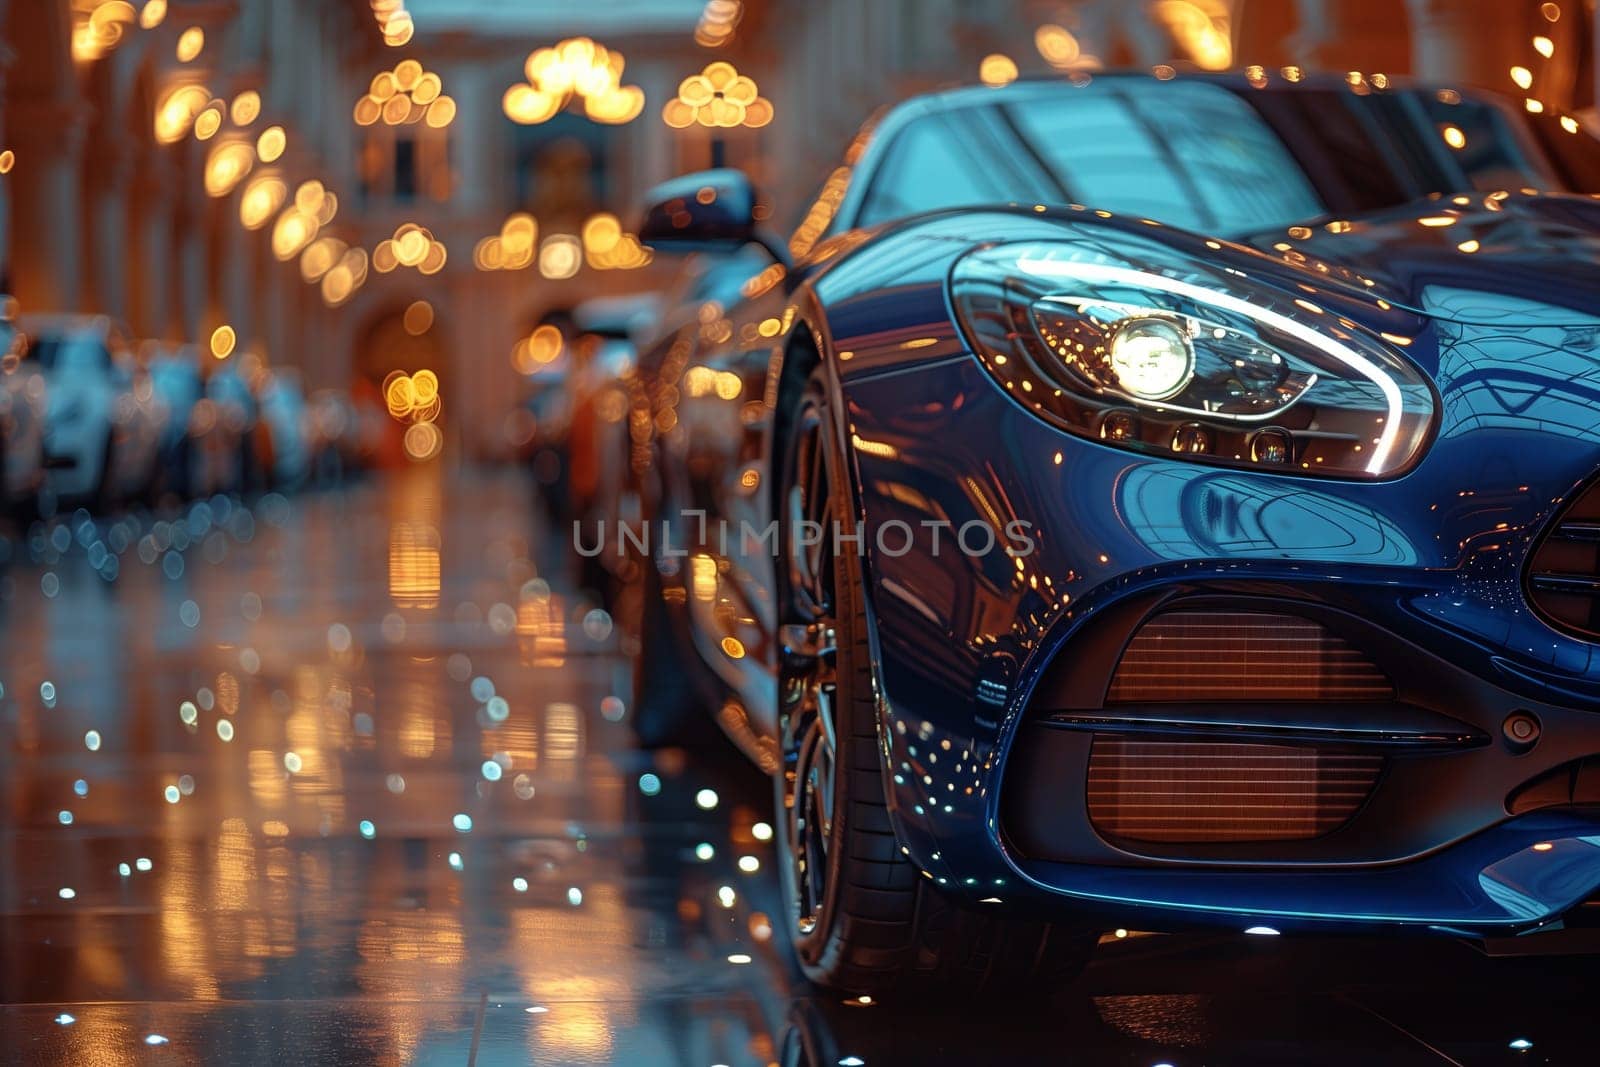 A sleek blue sports car parked on a wet city street at night by richwolf